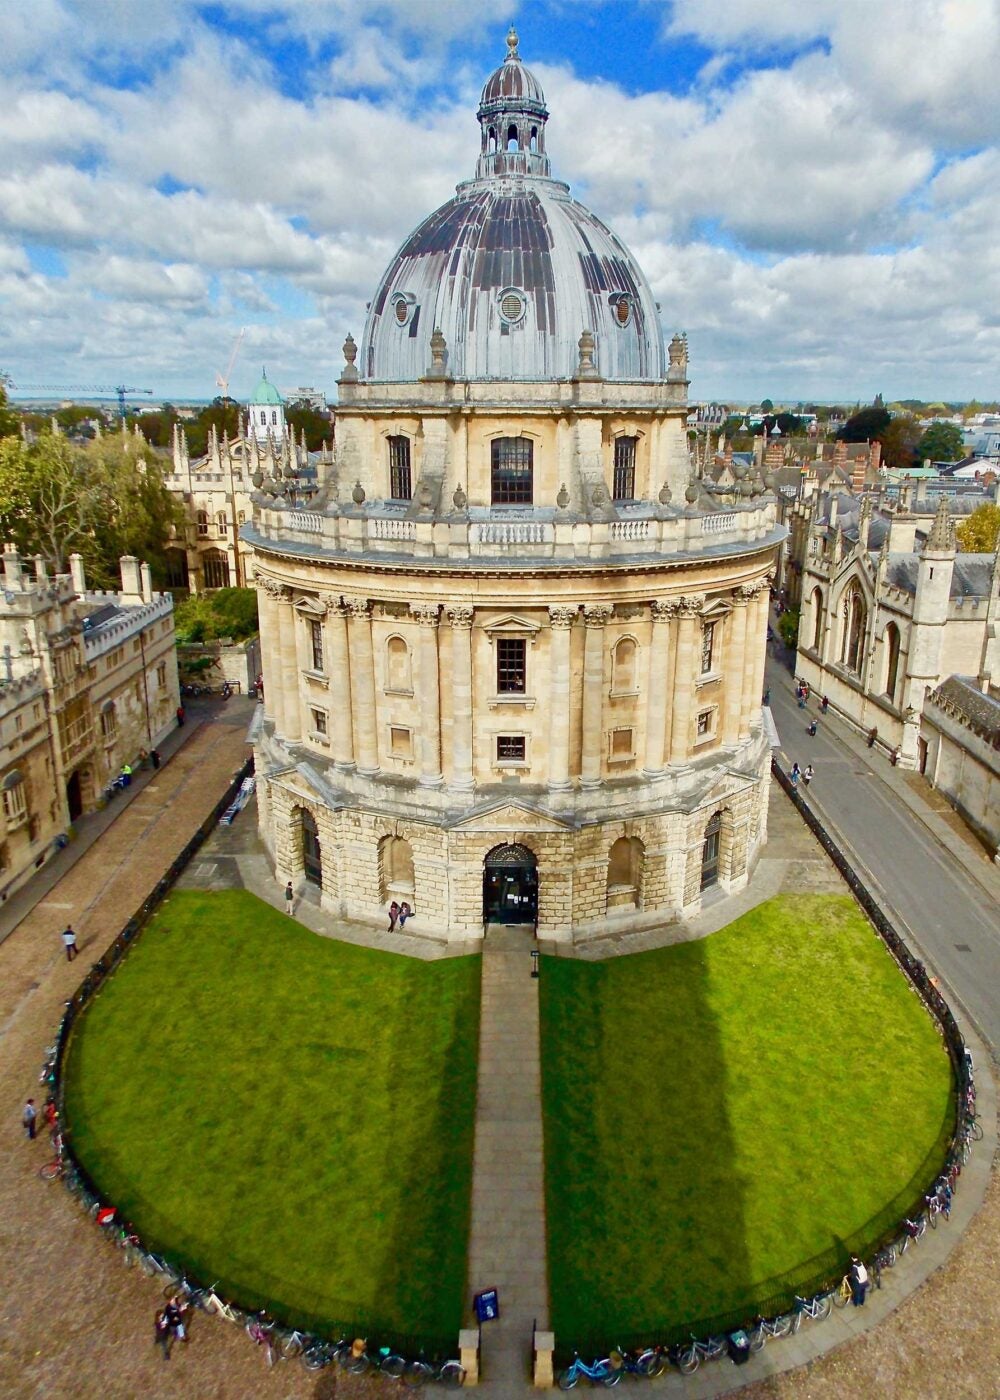 The Radcliffe Camera building at the University of Oxford.